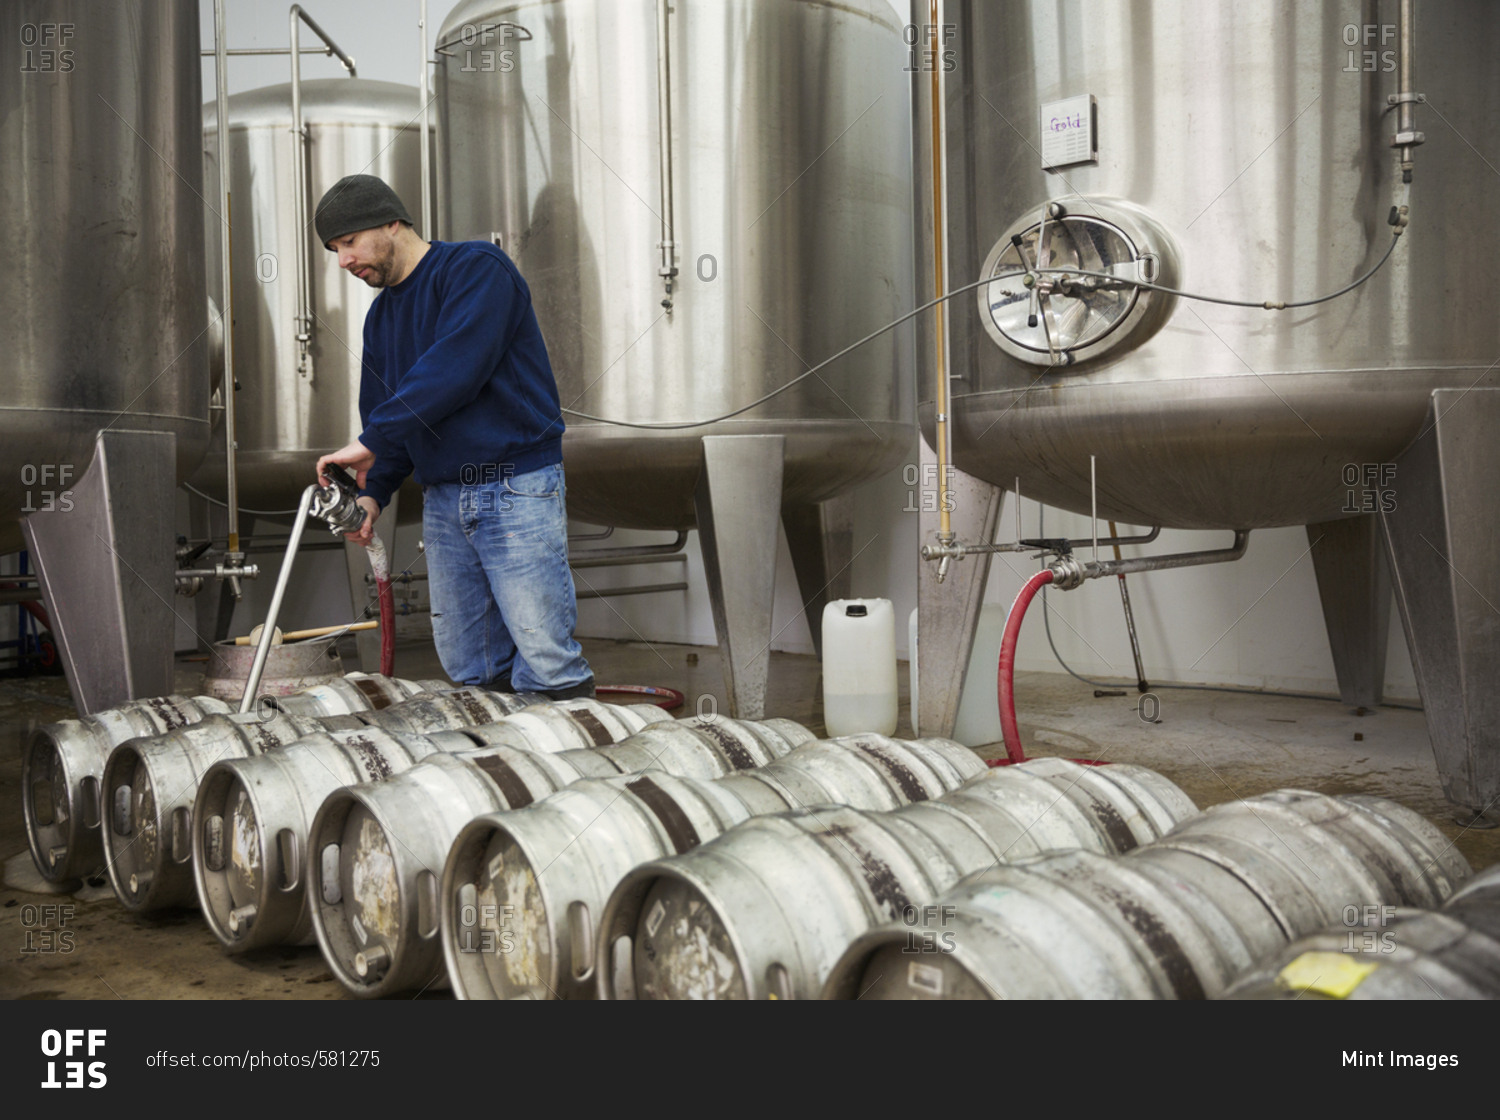 A man filling metal beer kegs from large fermentation tanks in a brewery